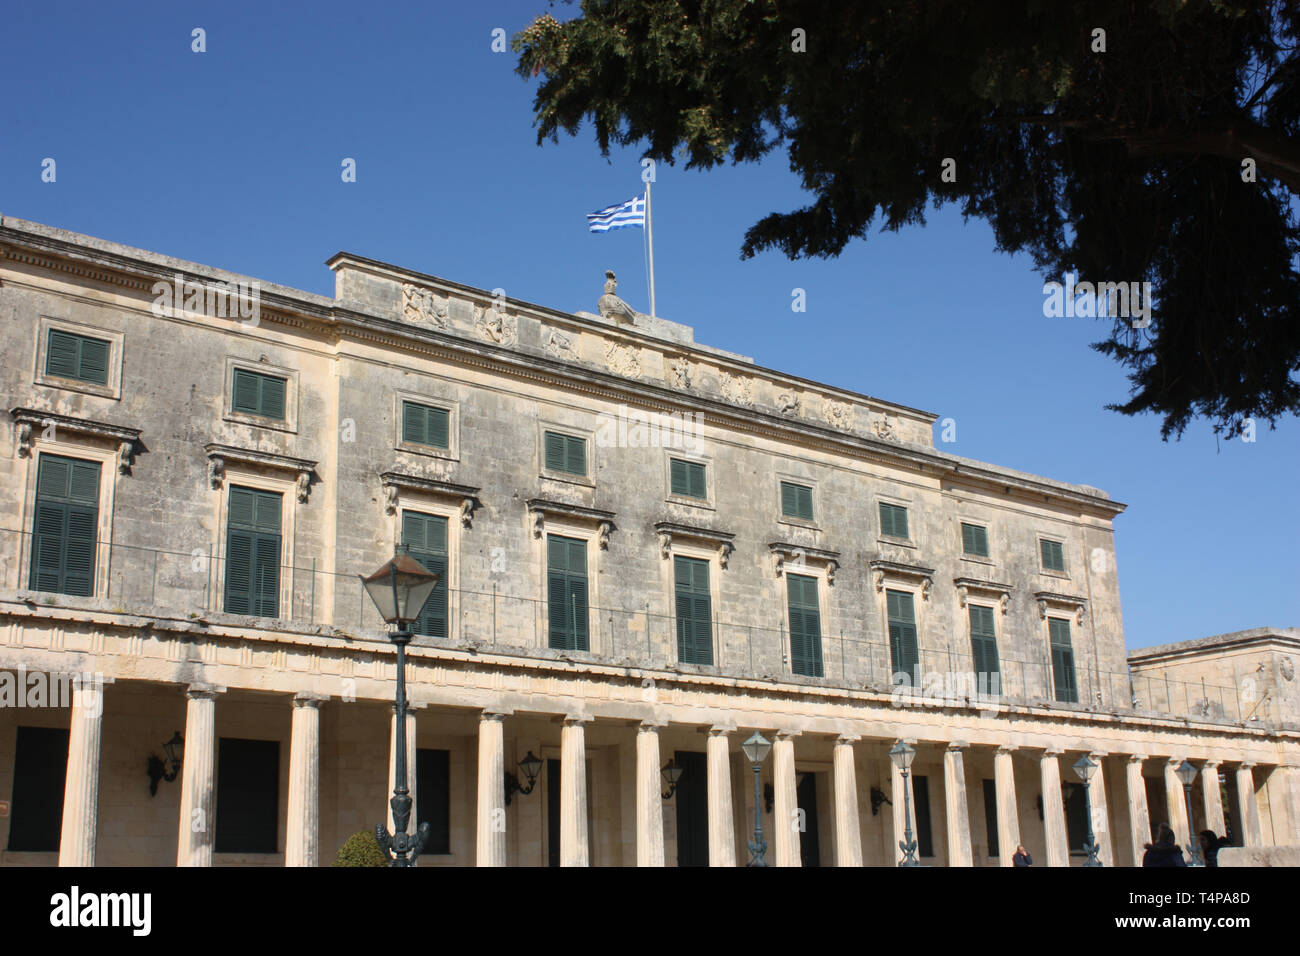 The Asiatic Museum in the old town of Corfu in the Ionian Islands of Greece Stock Photo